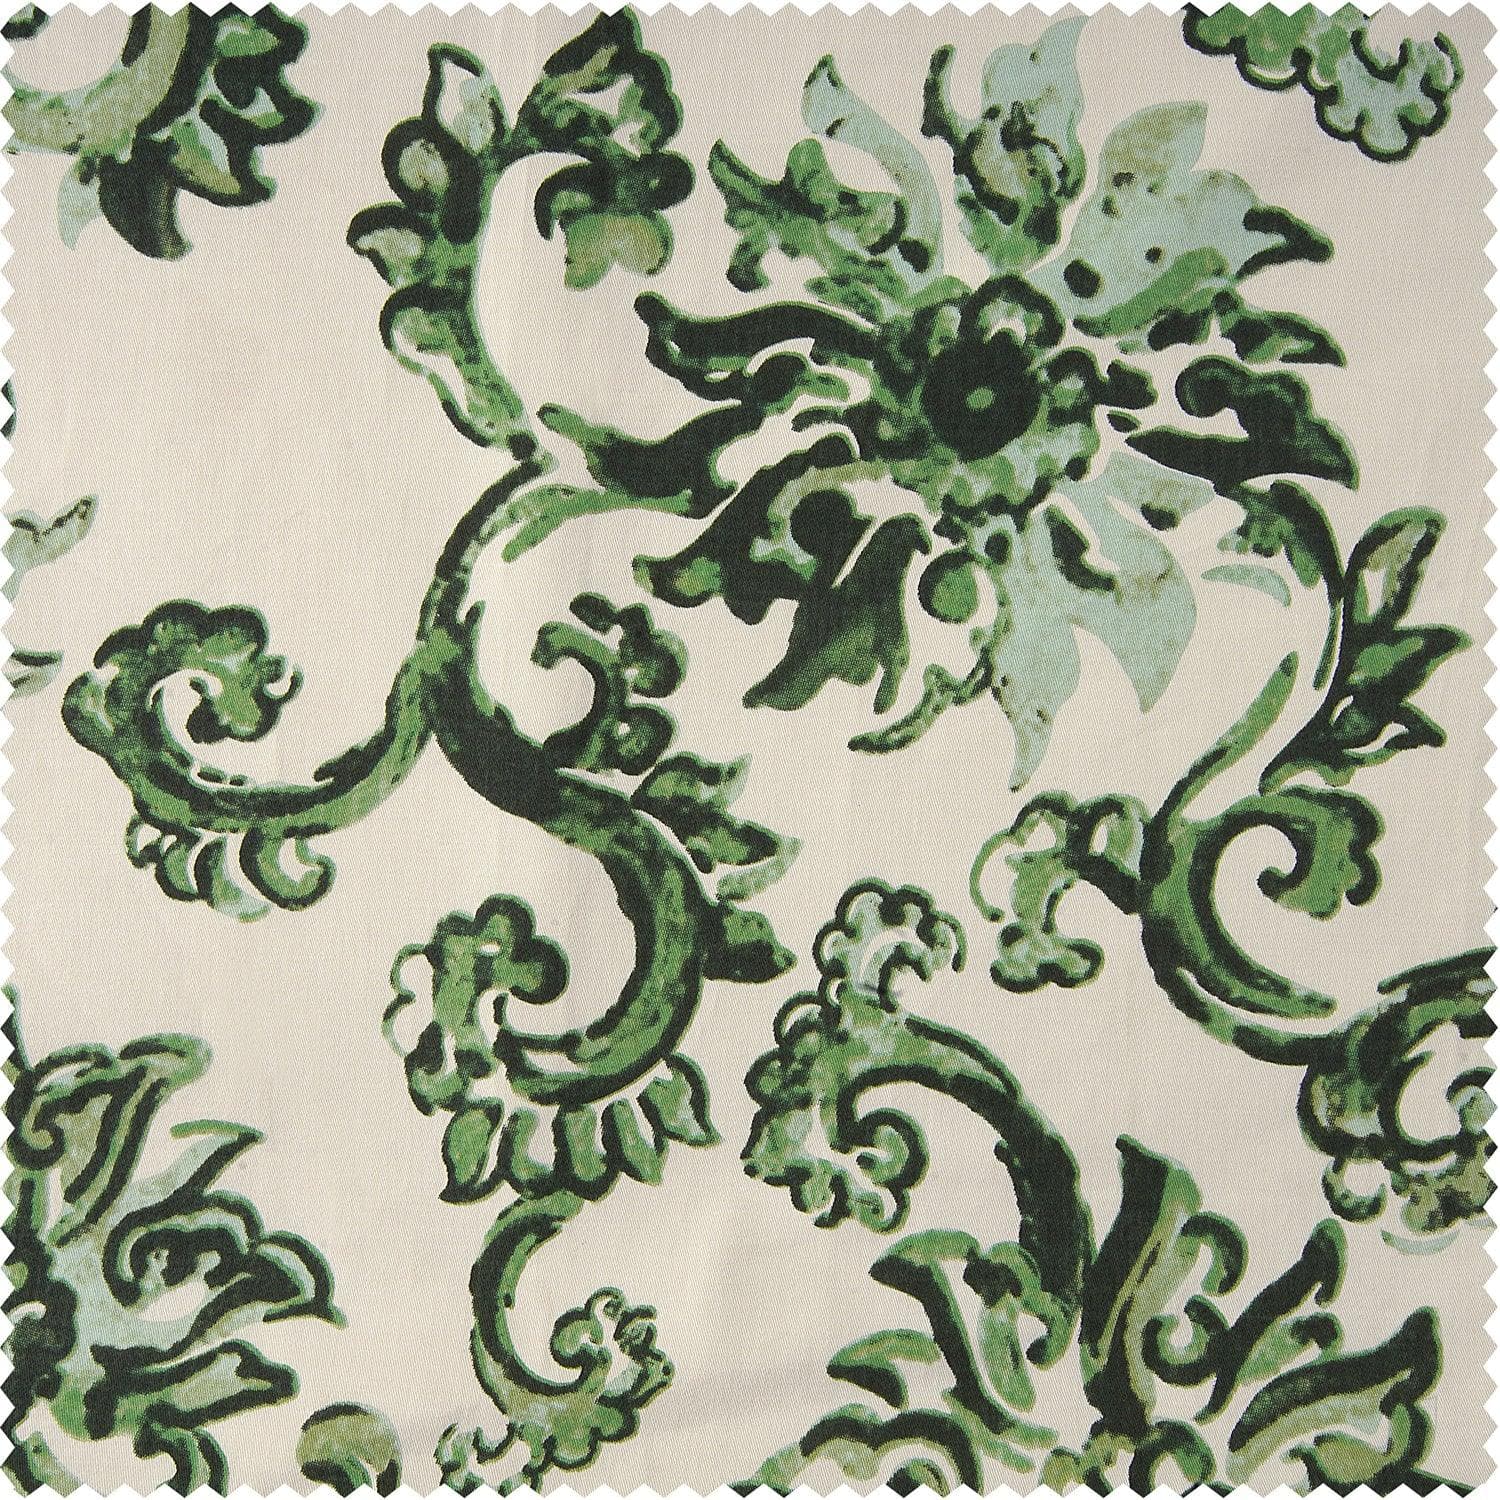 Indonesian Green Floral Printed Cotton Room Darkening Curtain